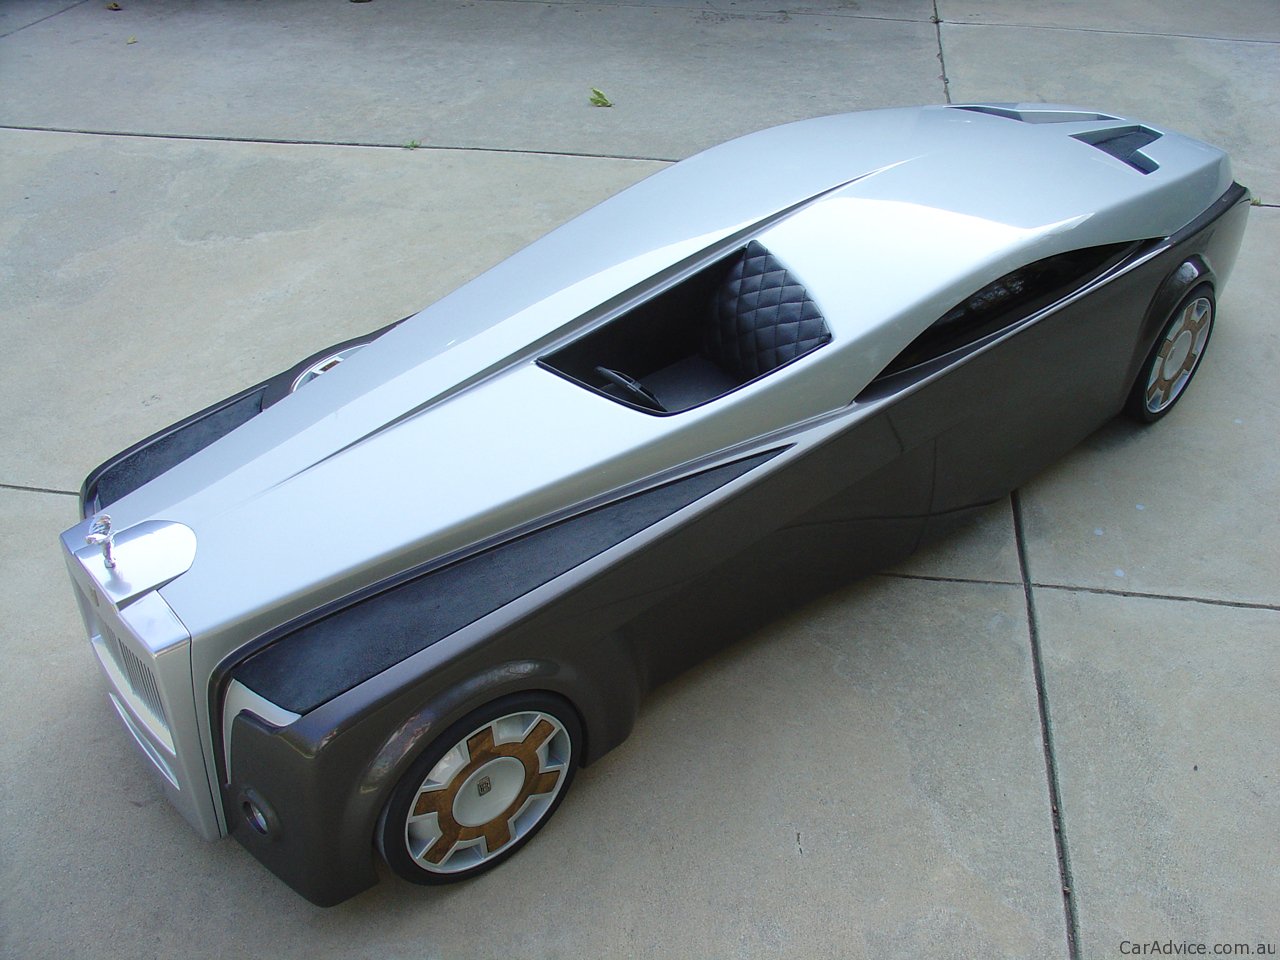 Checkout The Monster Automotive Idea Referred to as "Rolls-Royce Apparition Idea" – Pictures